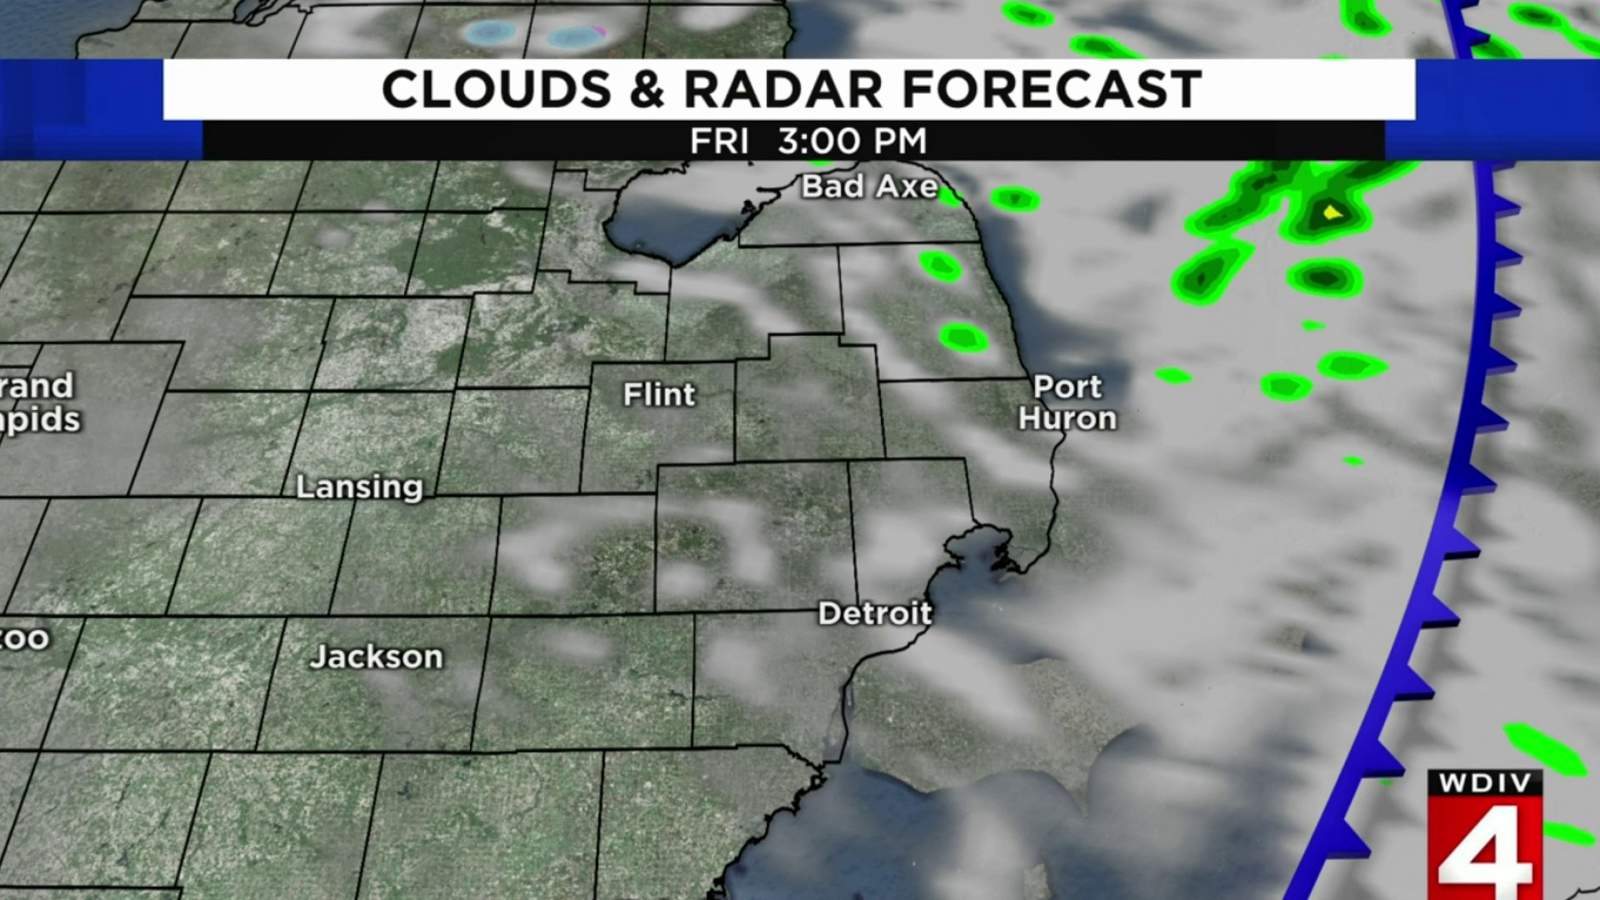 Metro Detroit weather: Be patient, the sunshine will return